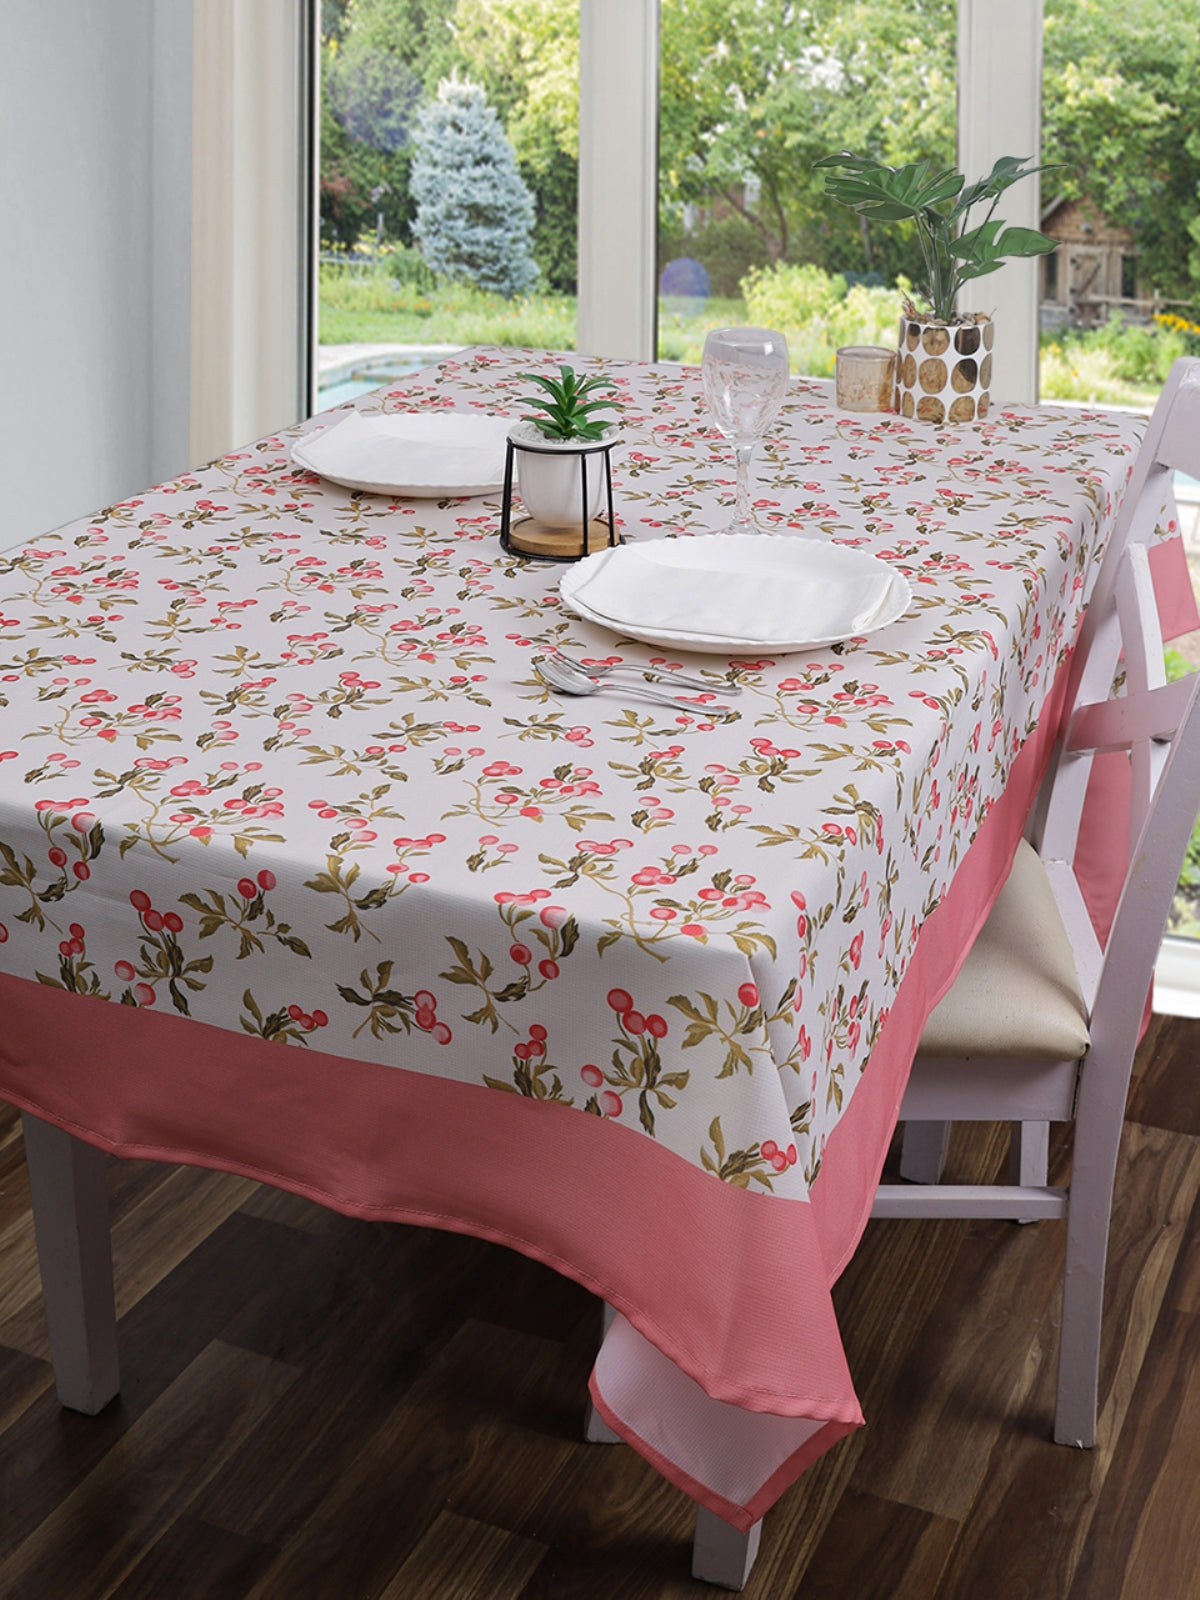 Polyester Floral Printed Dining Table Cover Cloth 60x90 Inch - Cream